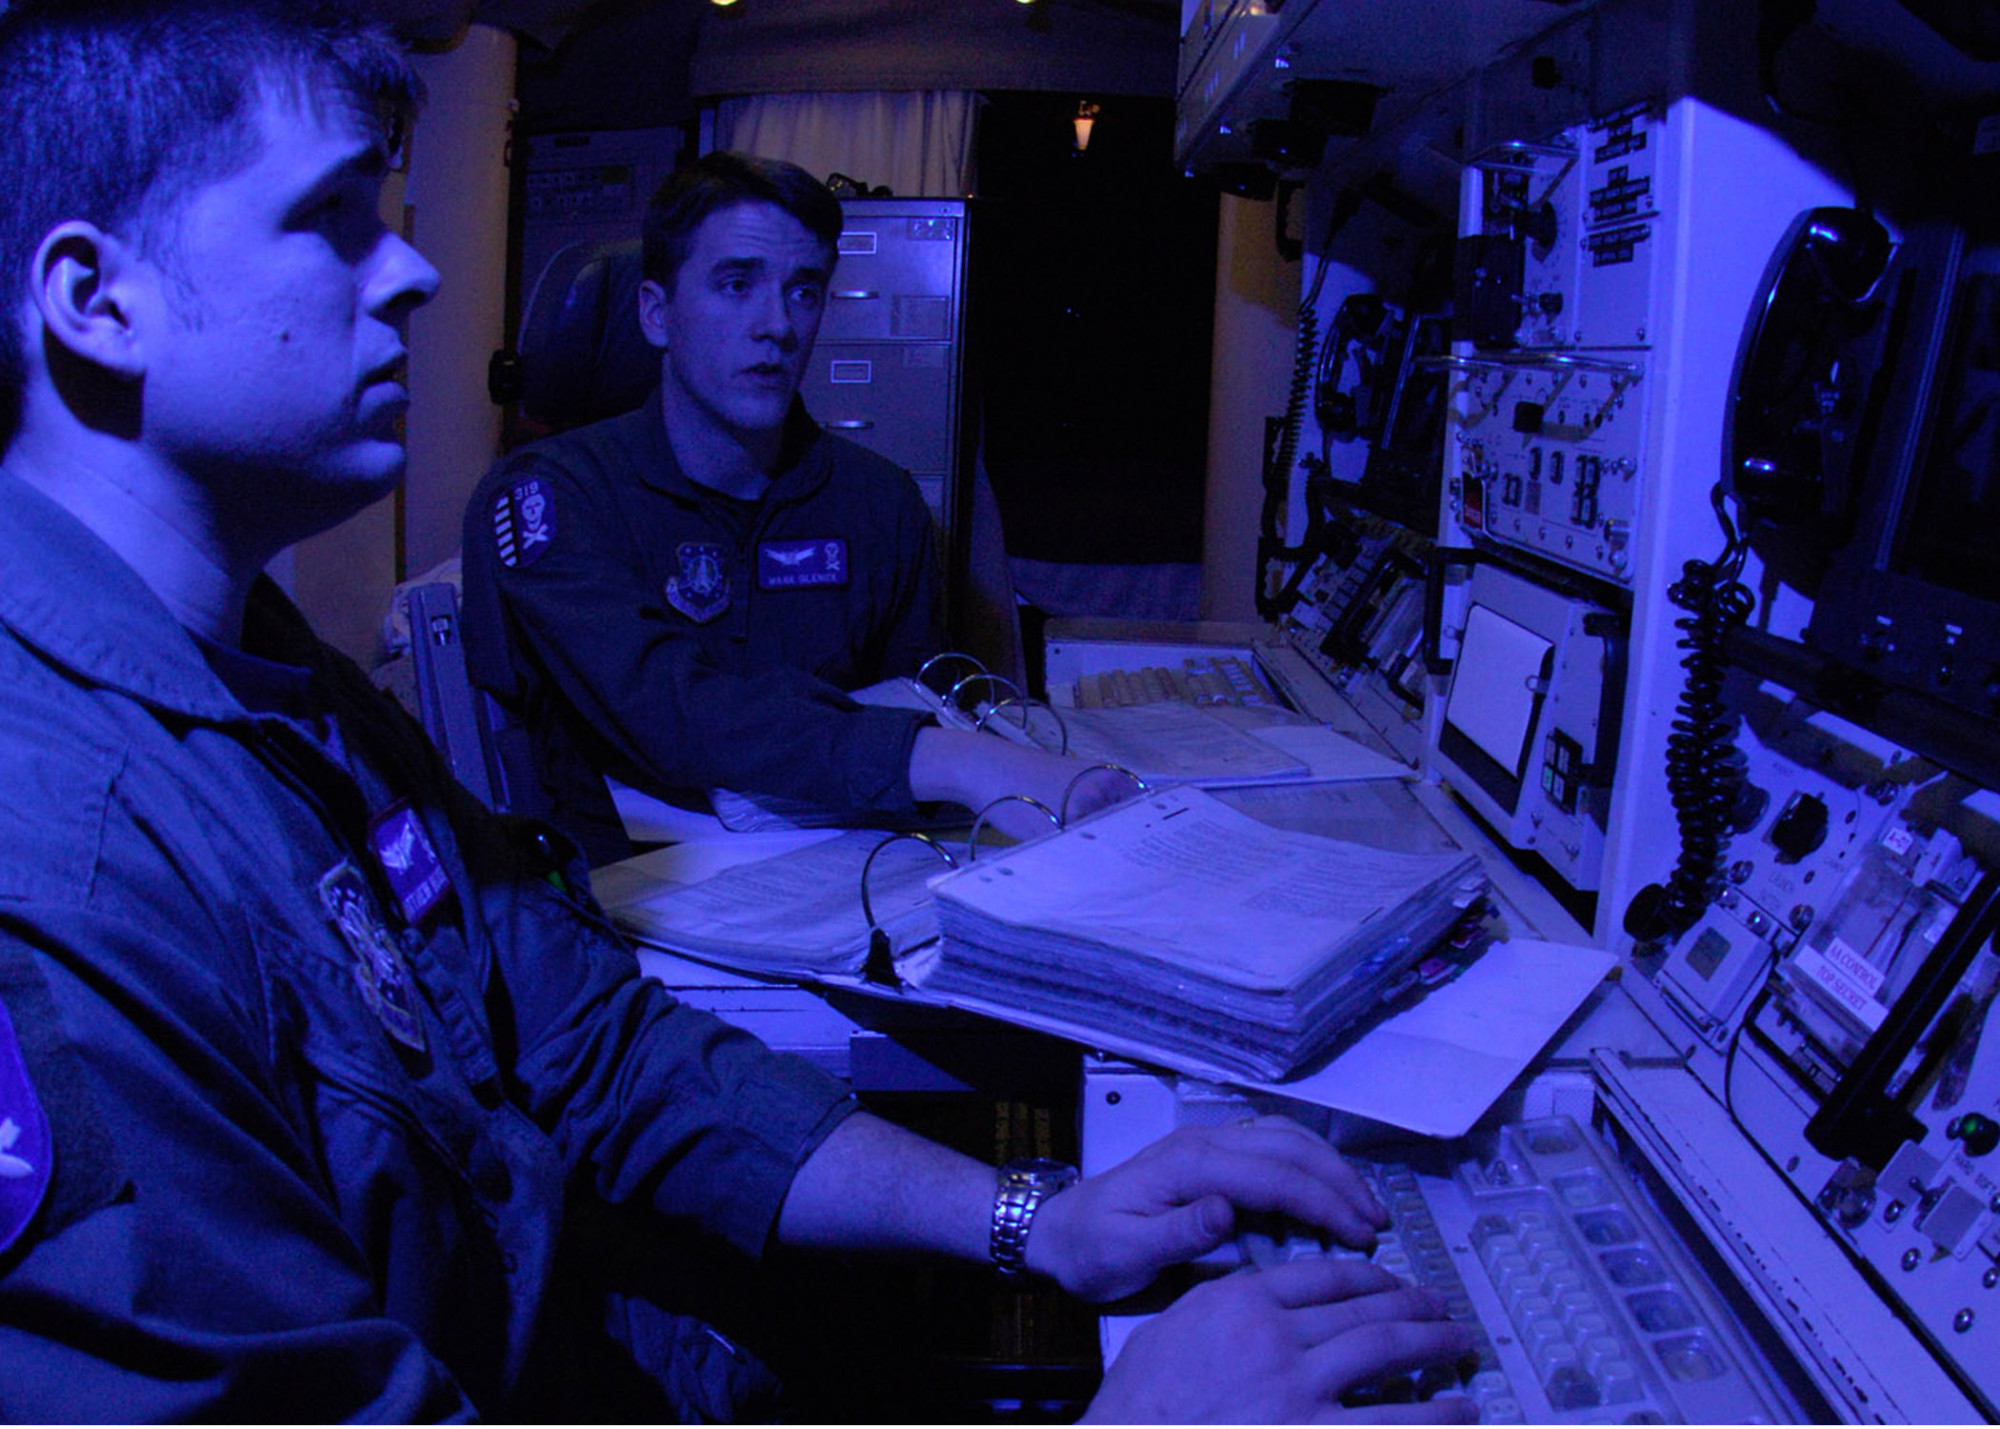 A pair of Air Force missile launch control officers, having passed their monthly proficiency tests, pull alert at a Minuteman III missile site.